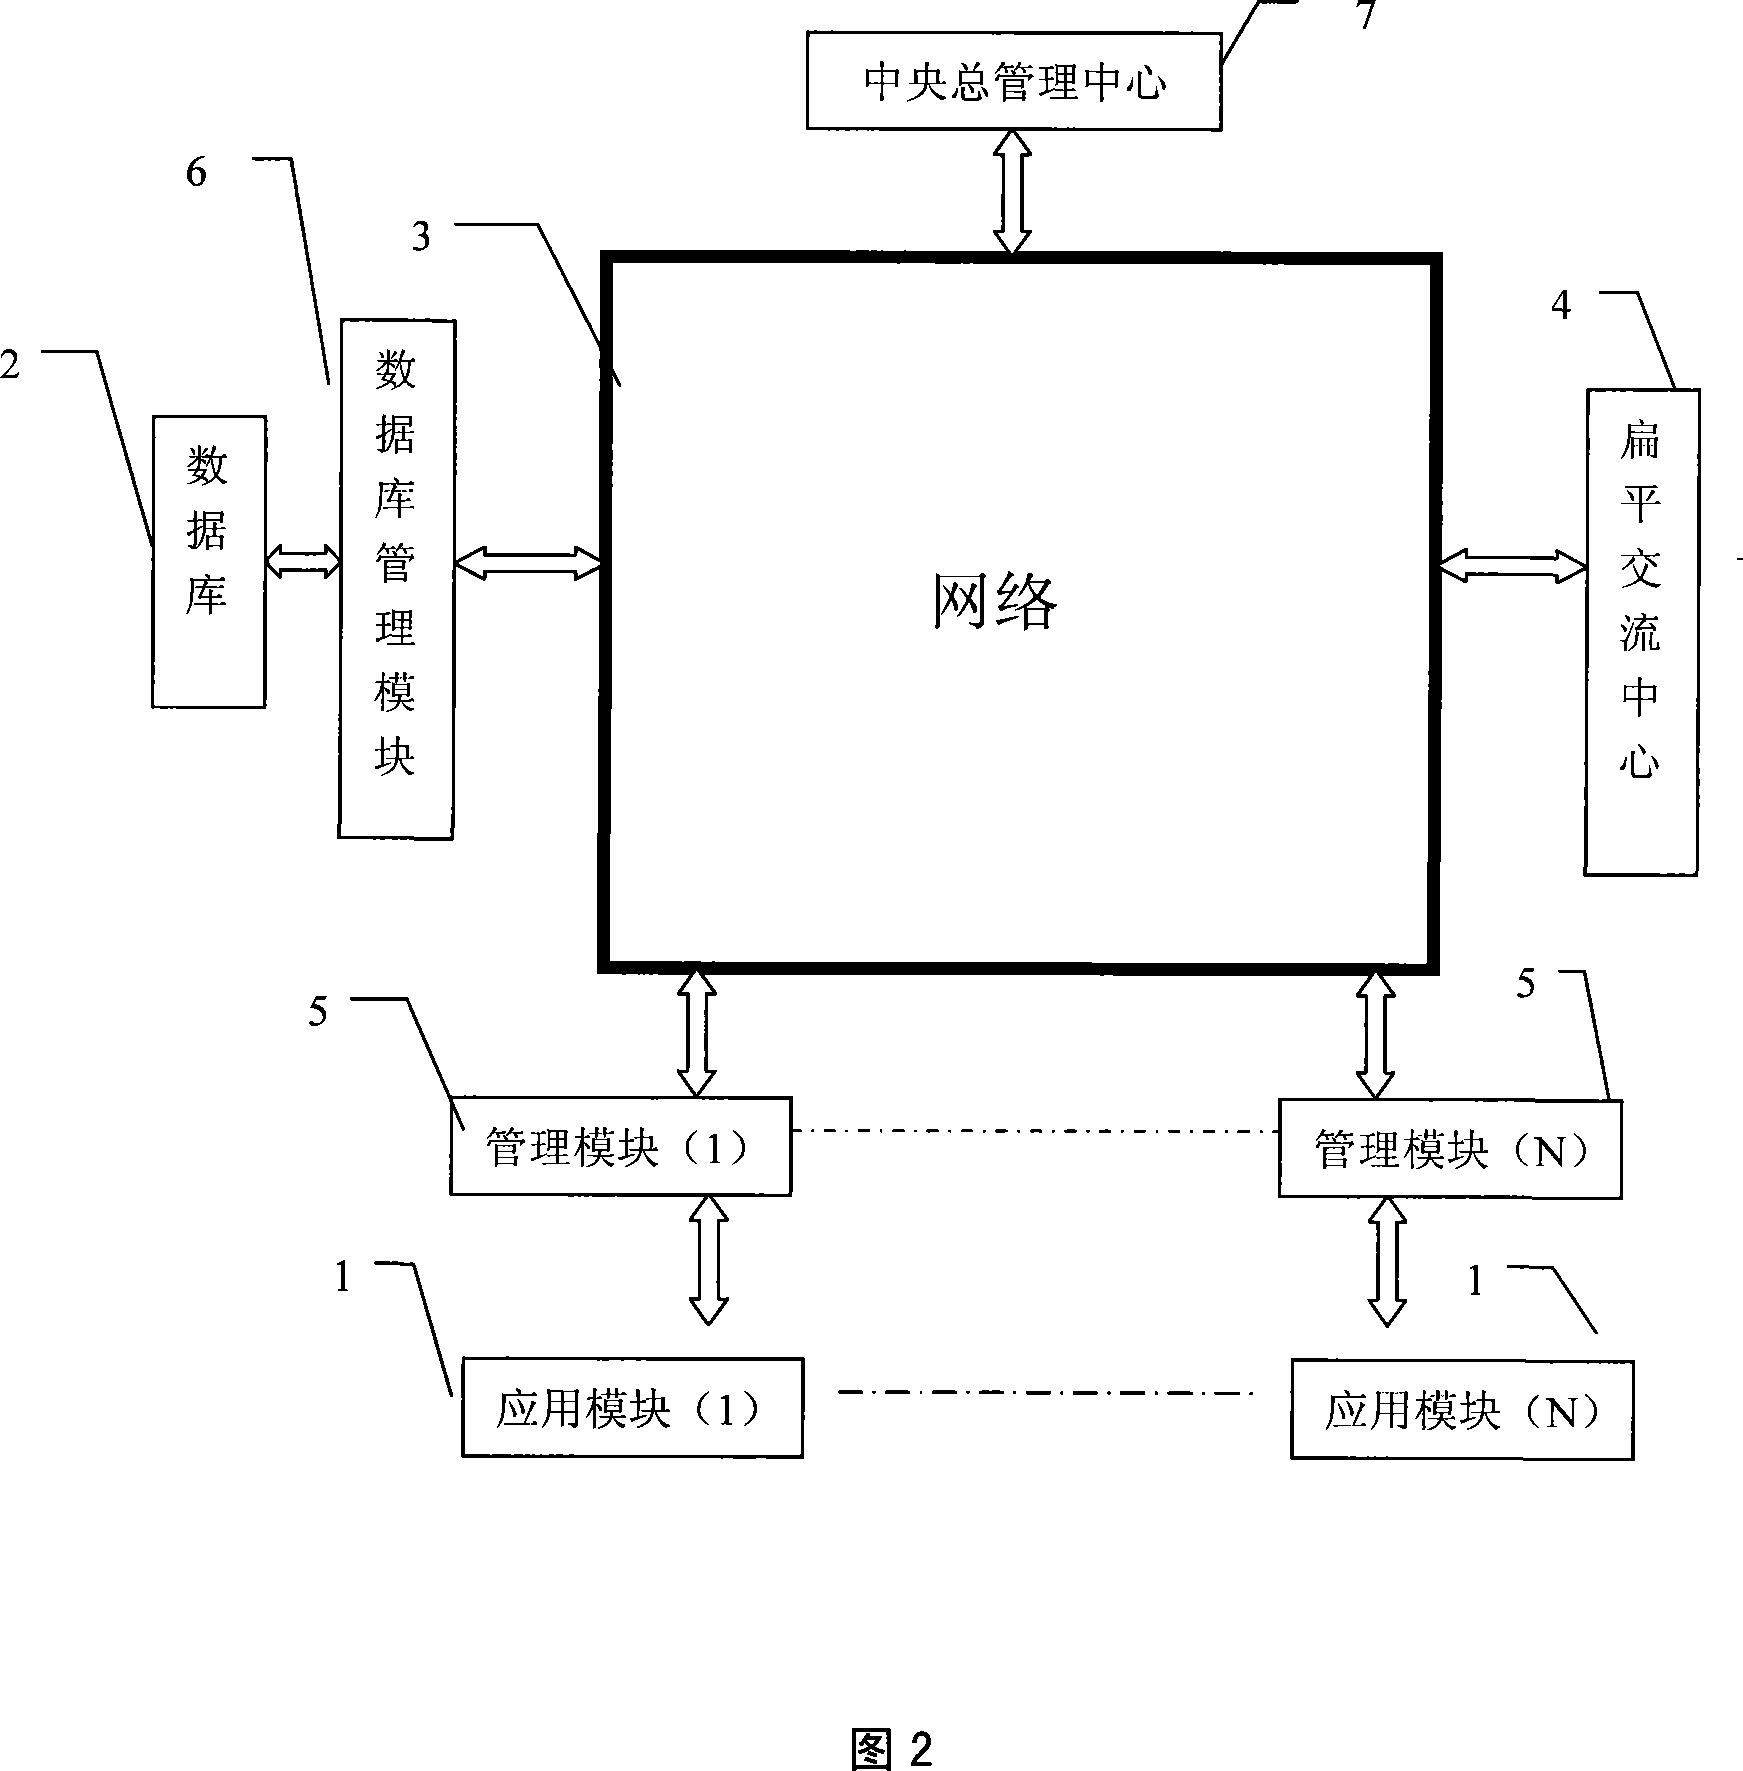 Flat control system with softening characteristic